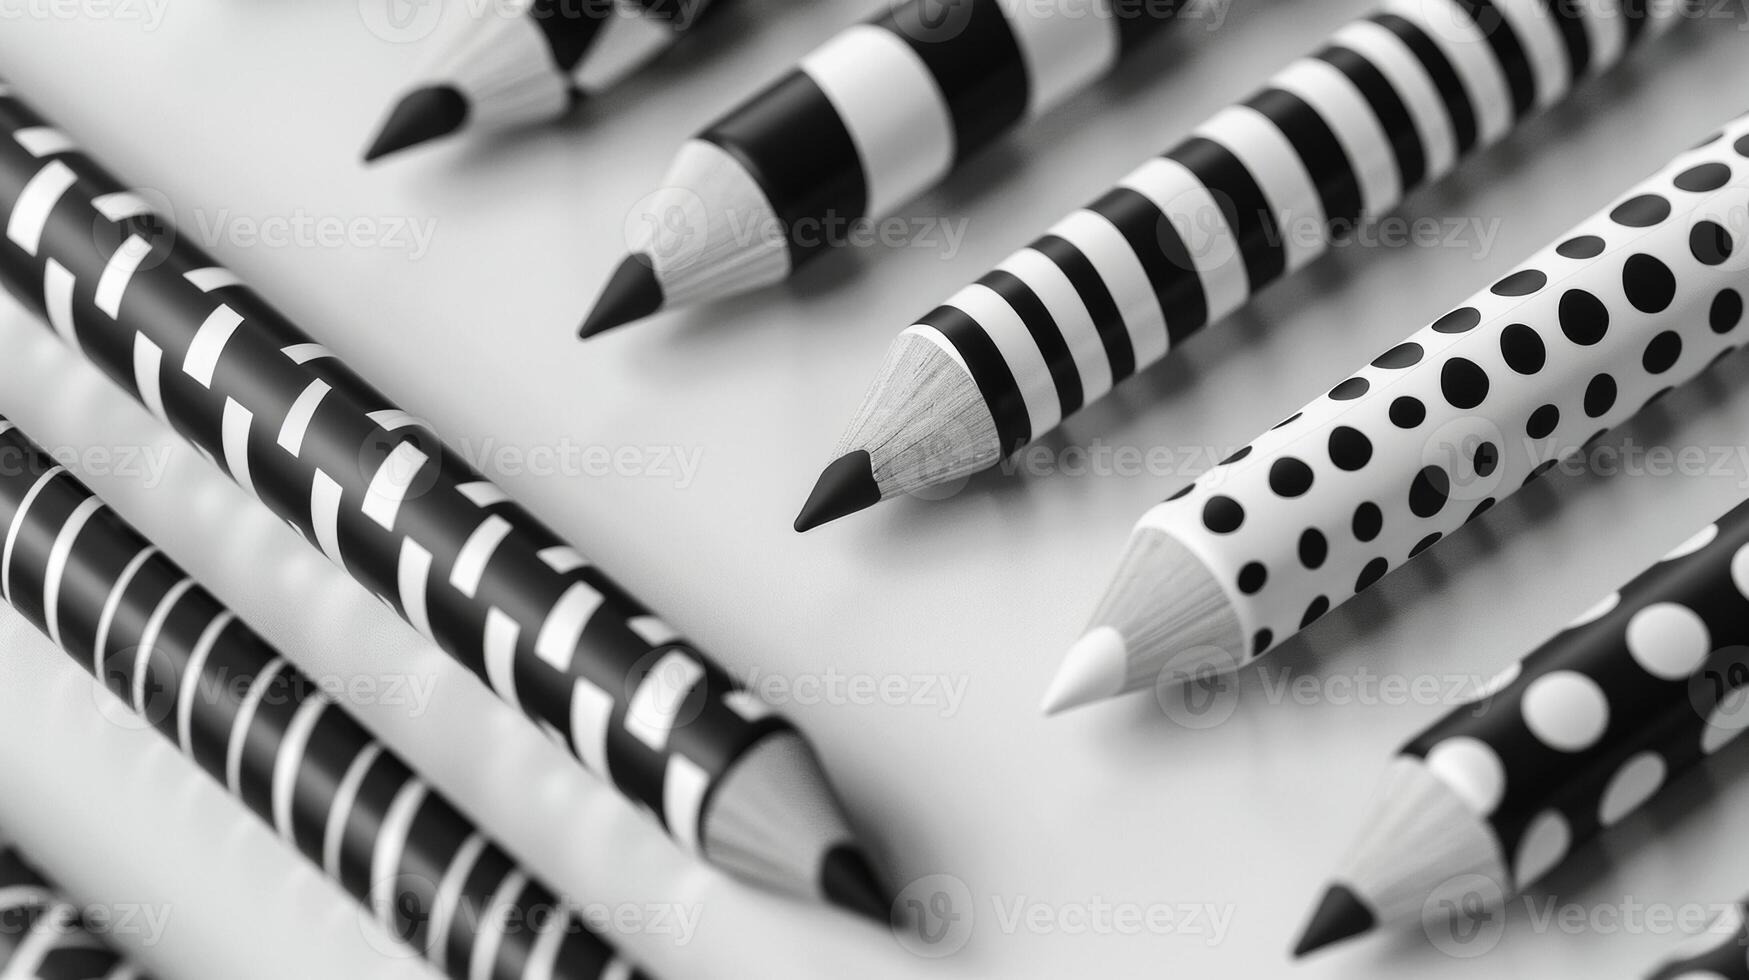 Blank mockup of a set of pencils with different patterns allowing for endless customization possibilities. photo